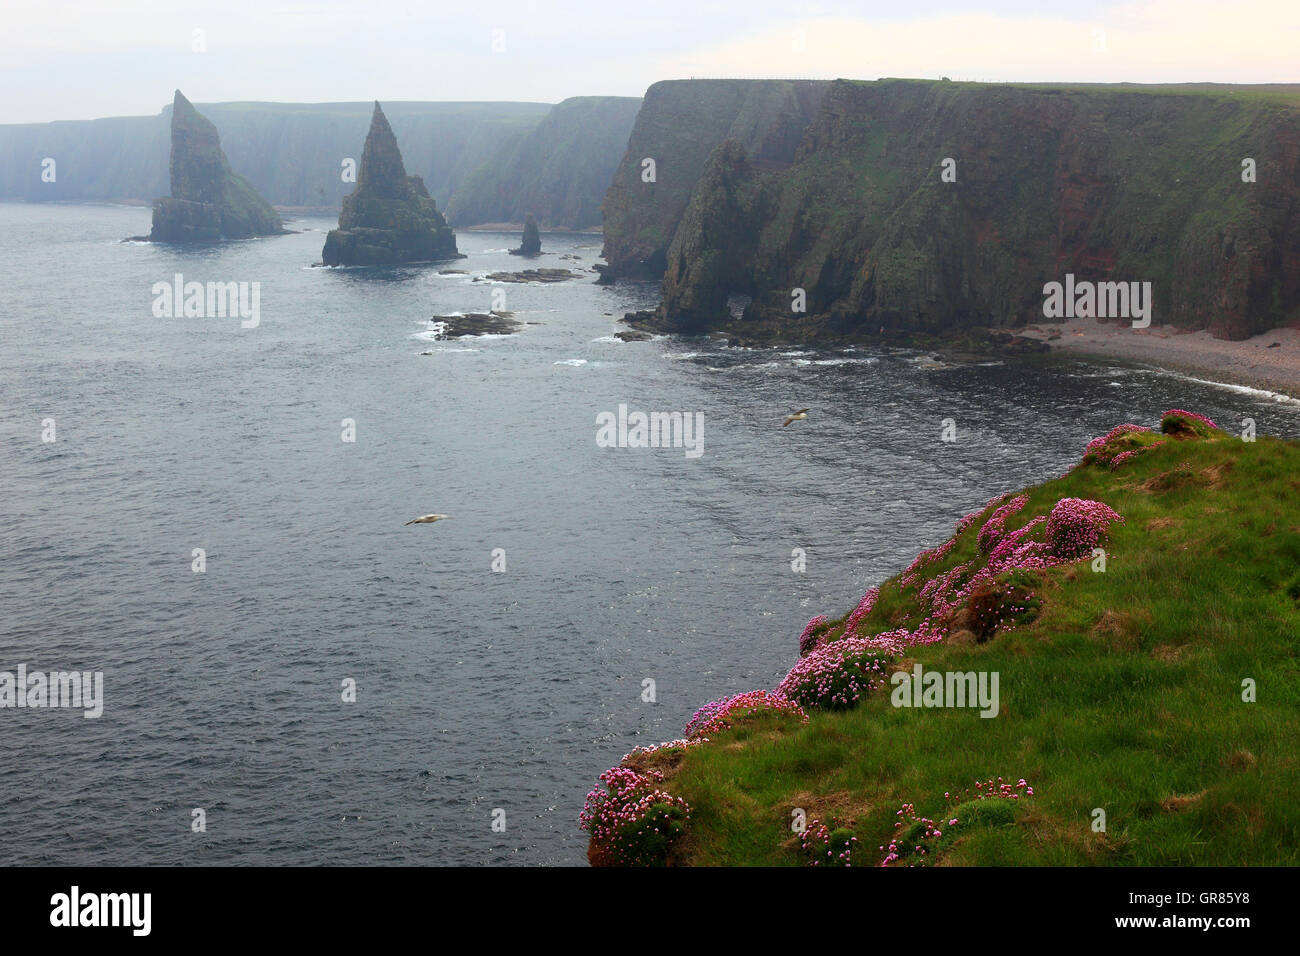 Scotland, highlands, Duncansby Head is the north-east point of Scotland, cleft rock formations and rock needles, the so-called D Stock Photo